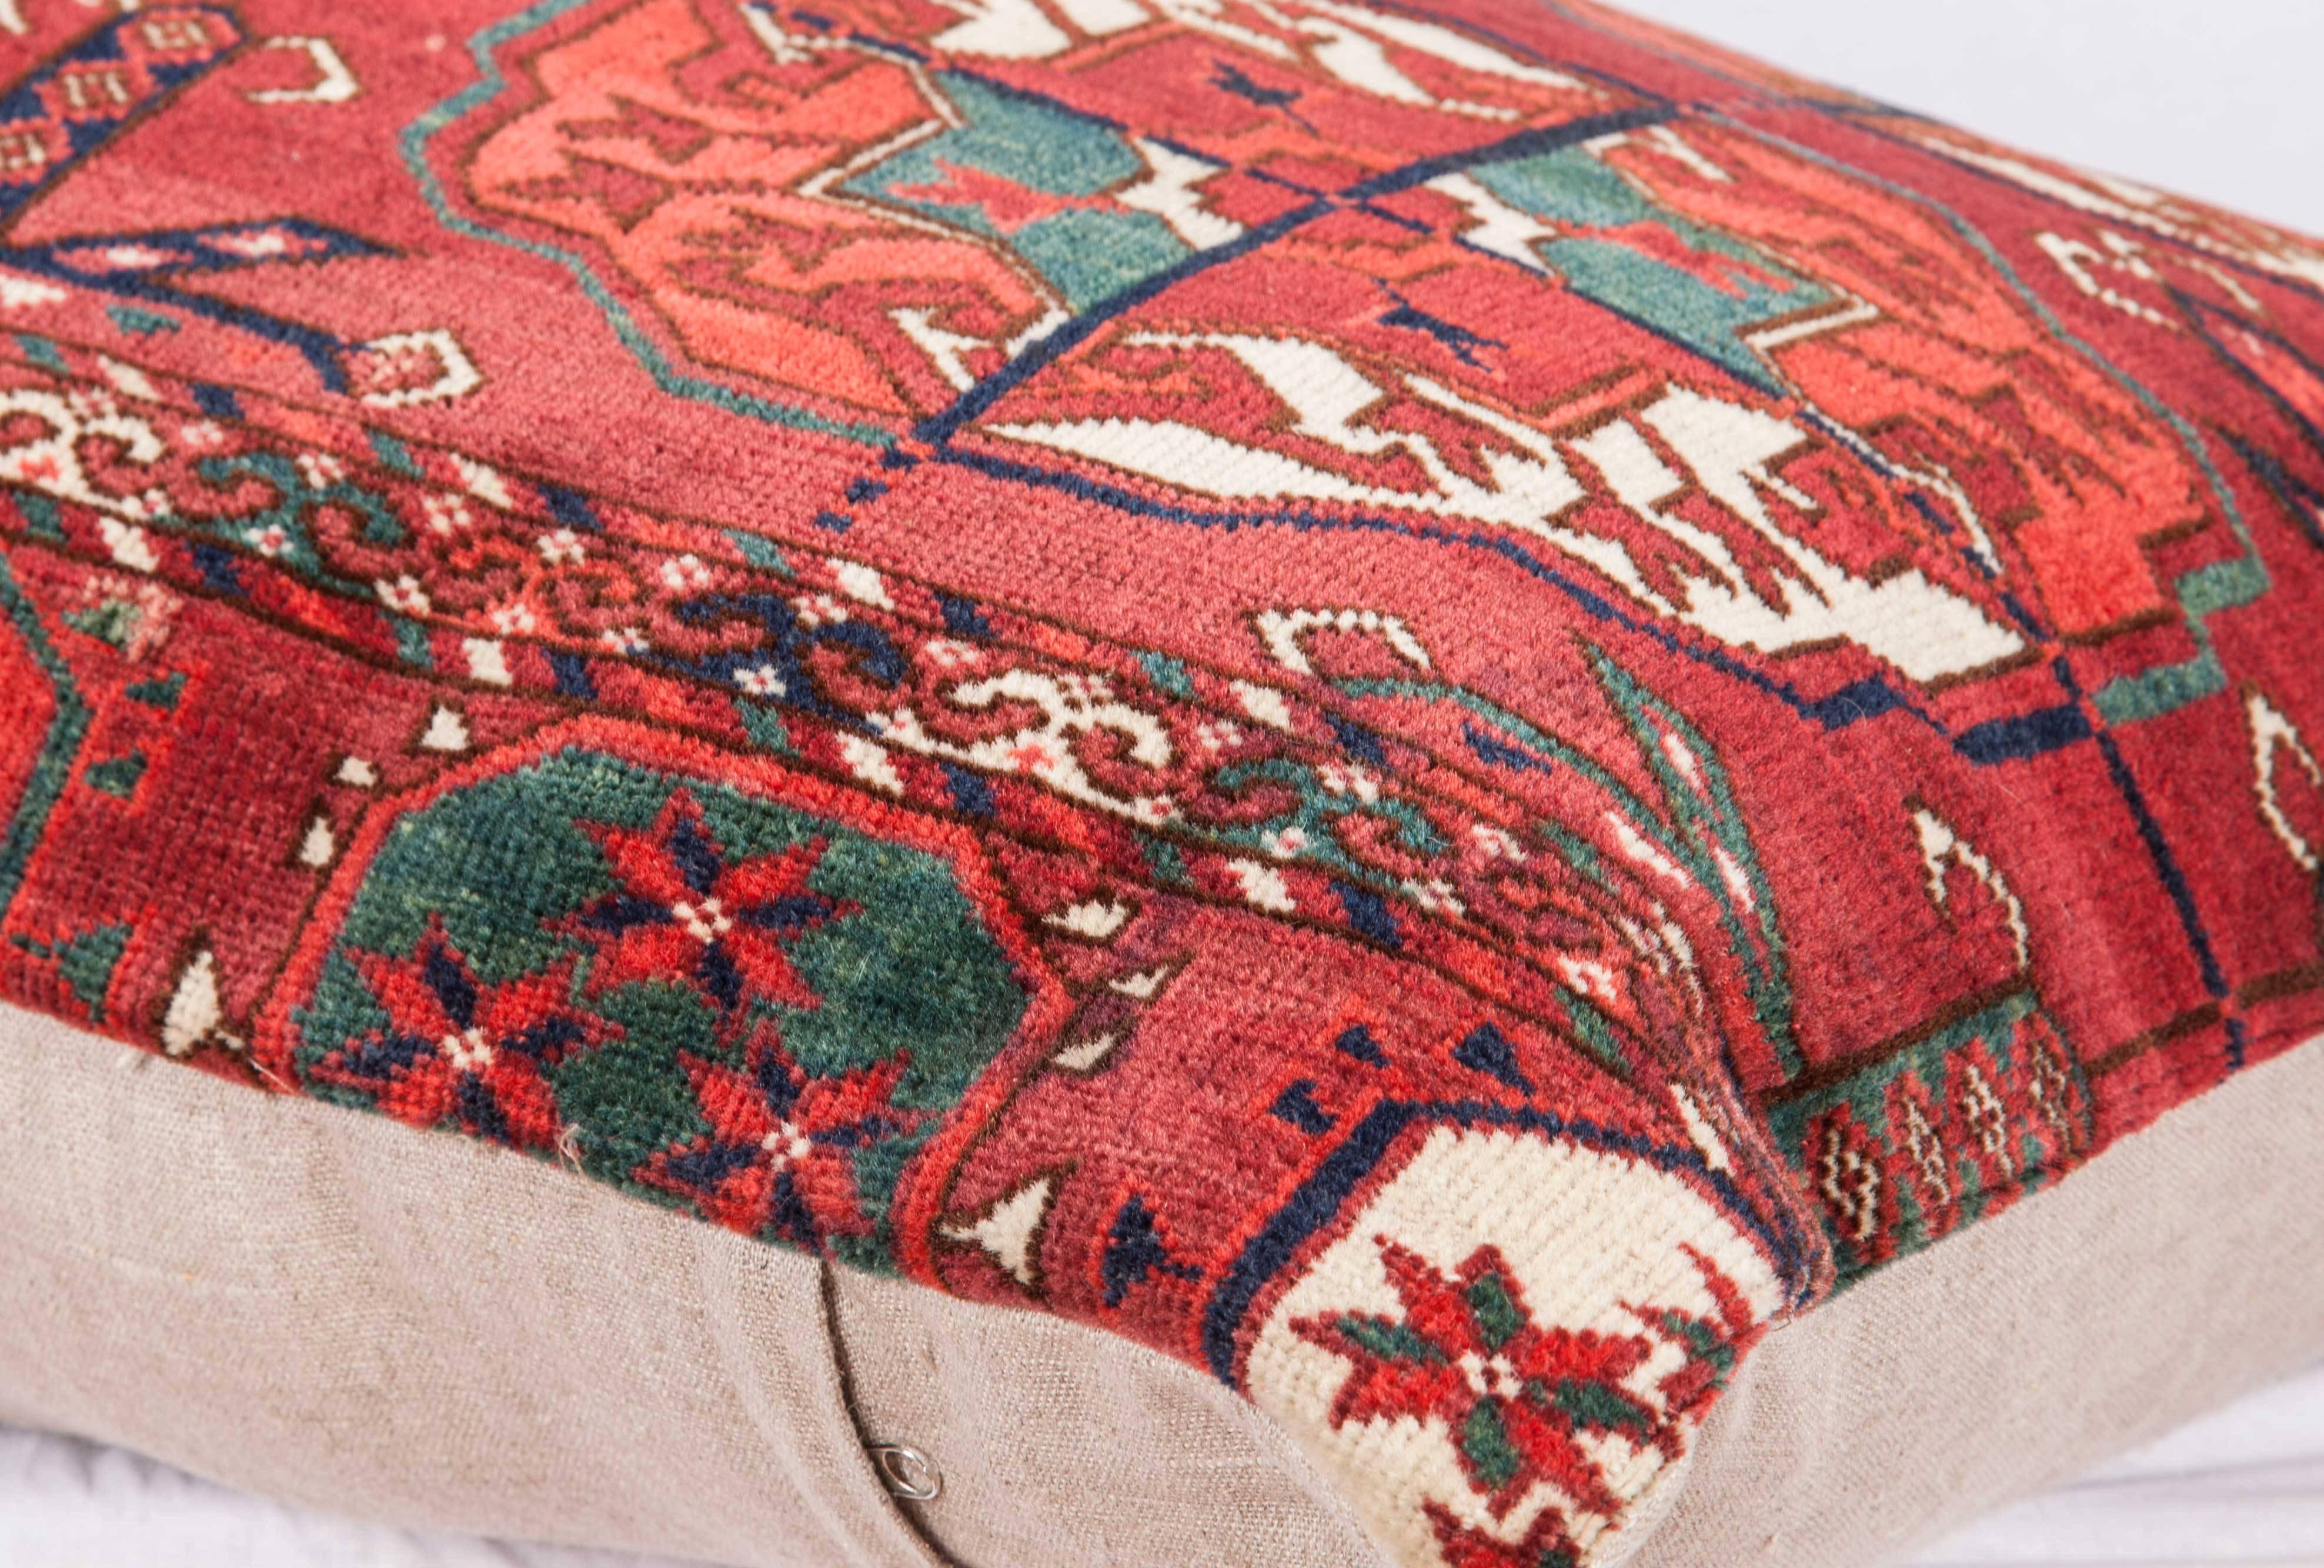 Antique Pillow with Velvet like Texture Made Out of a Turkmen Rug 2